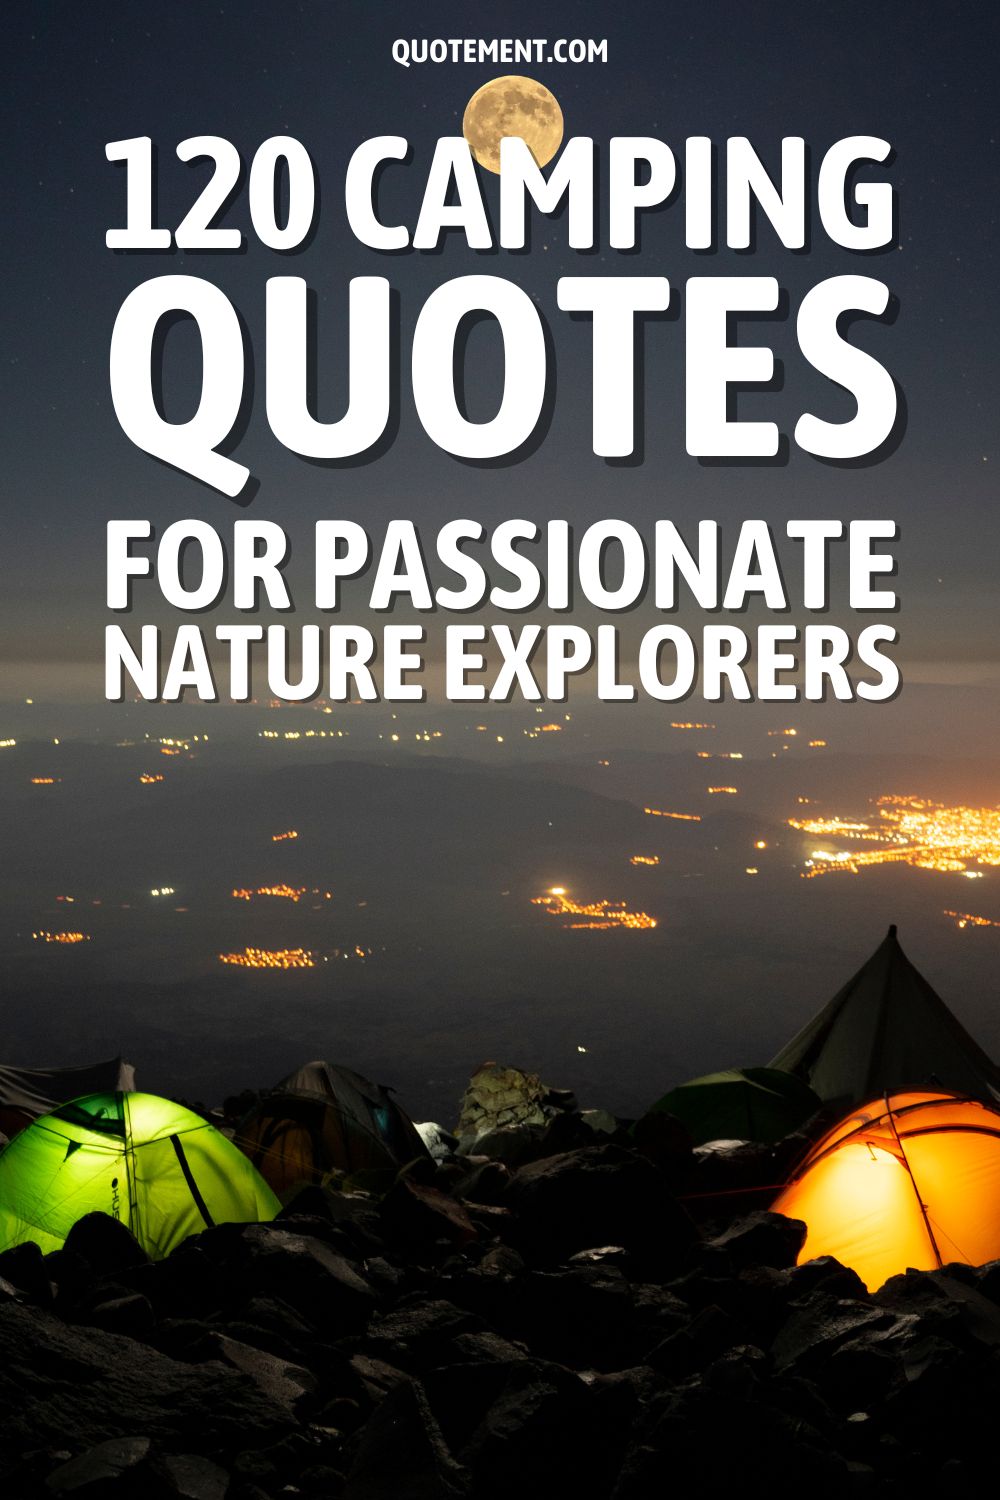 120 Camping Quotes For Passionate Nature Explorers